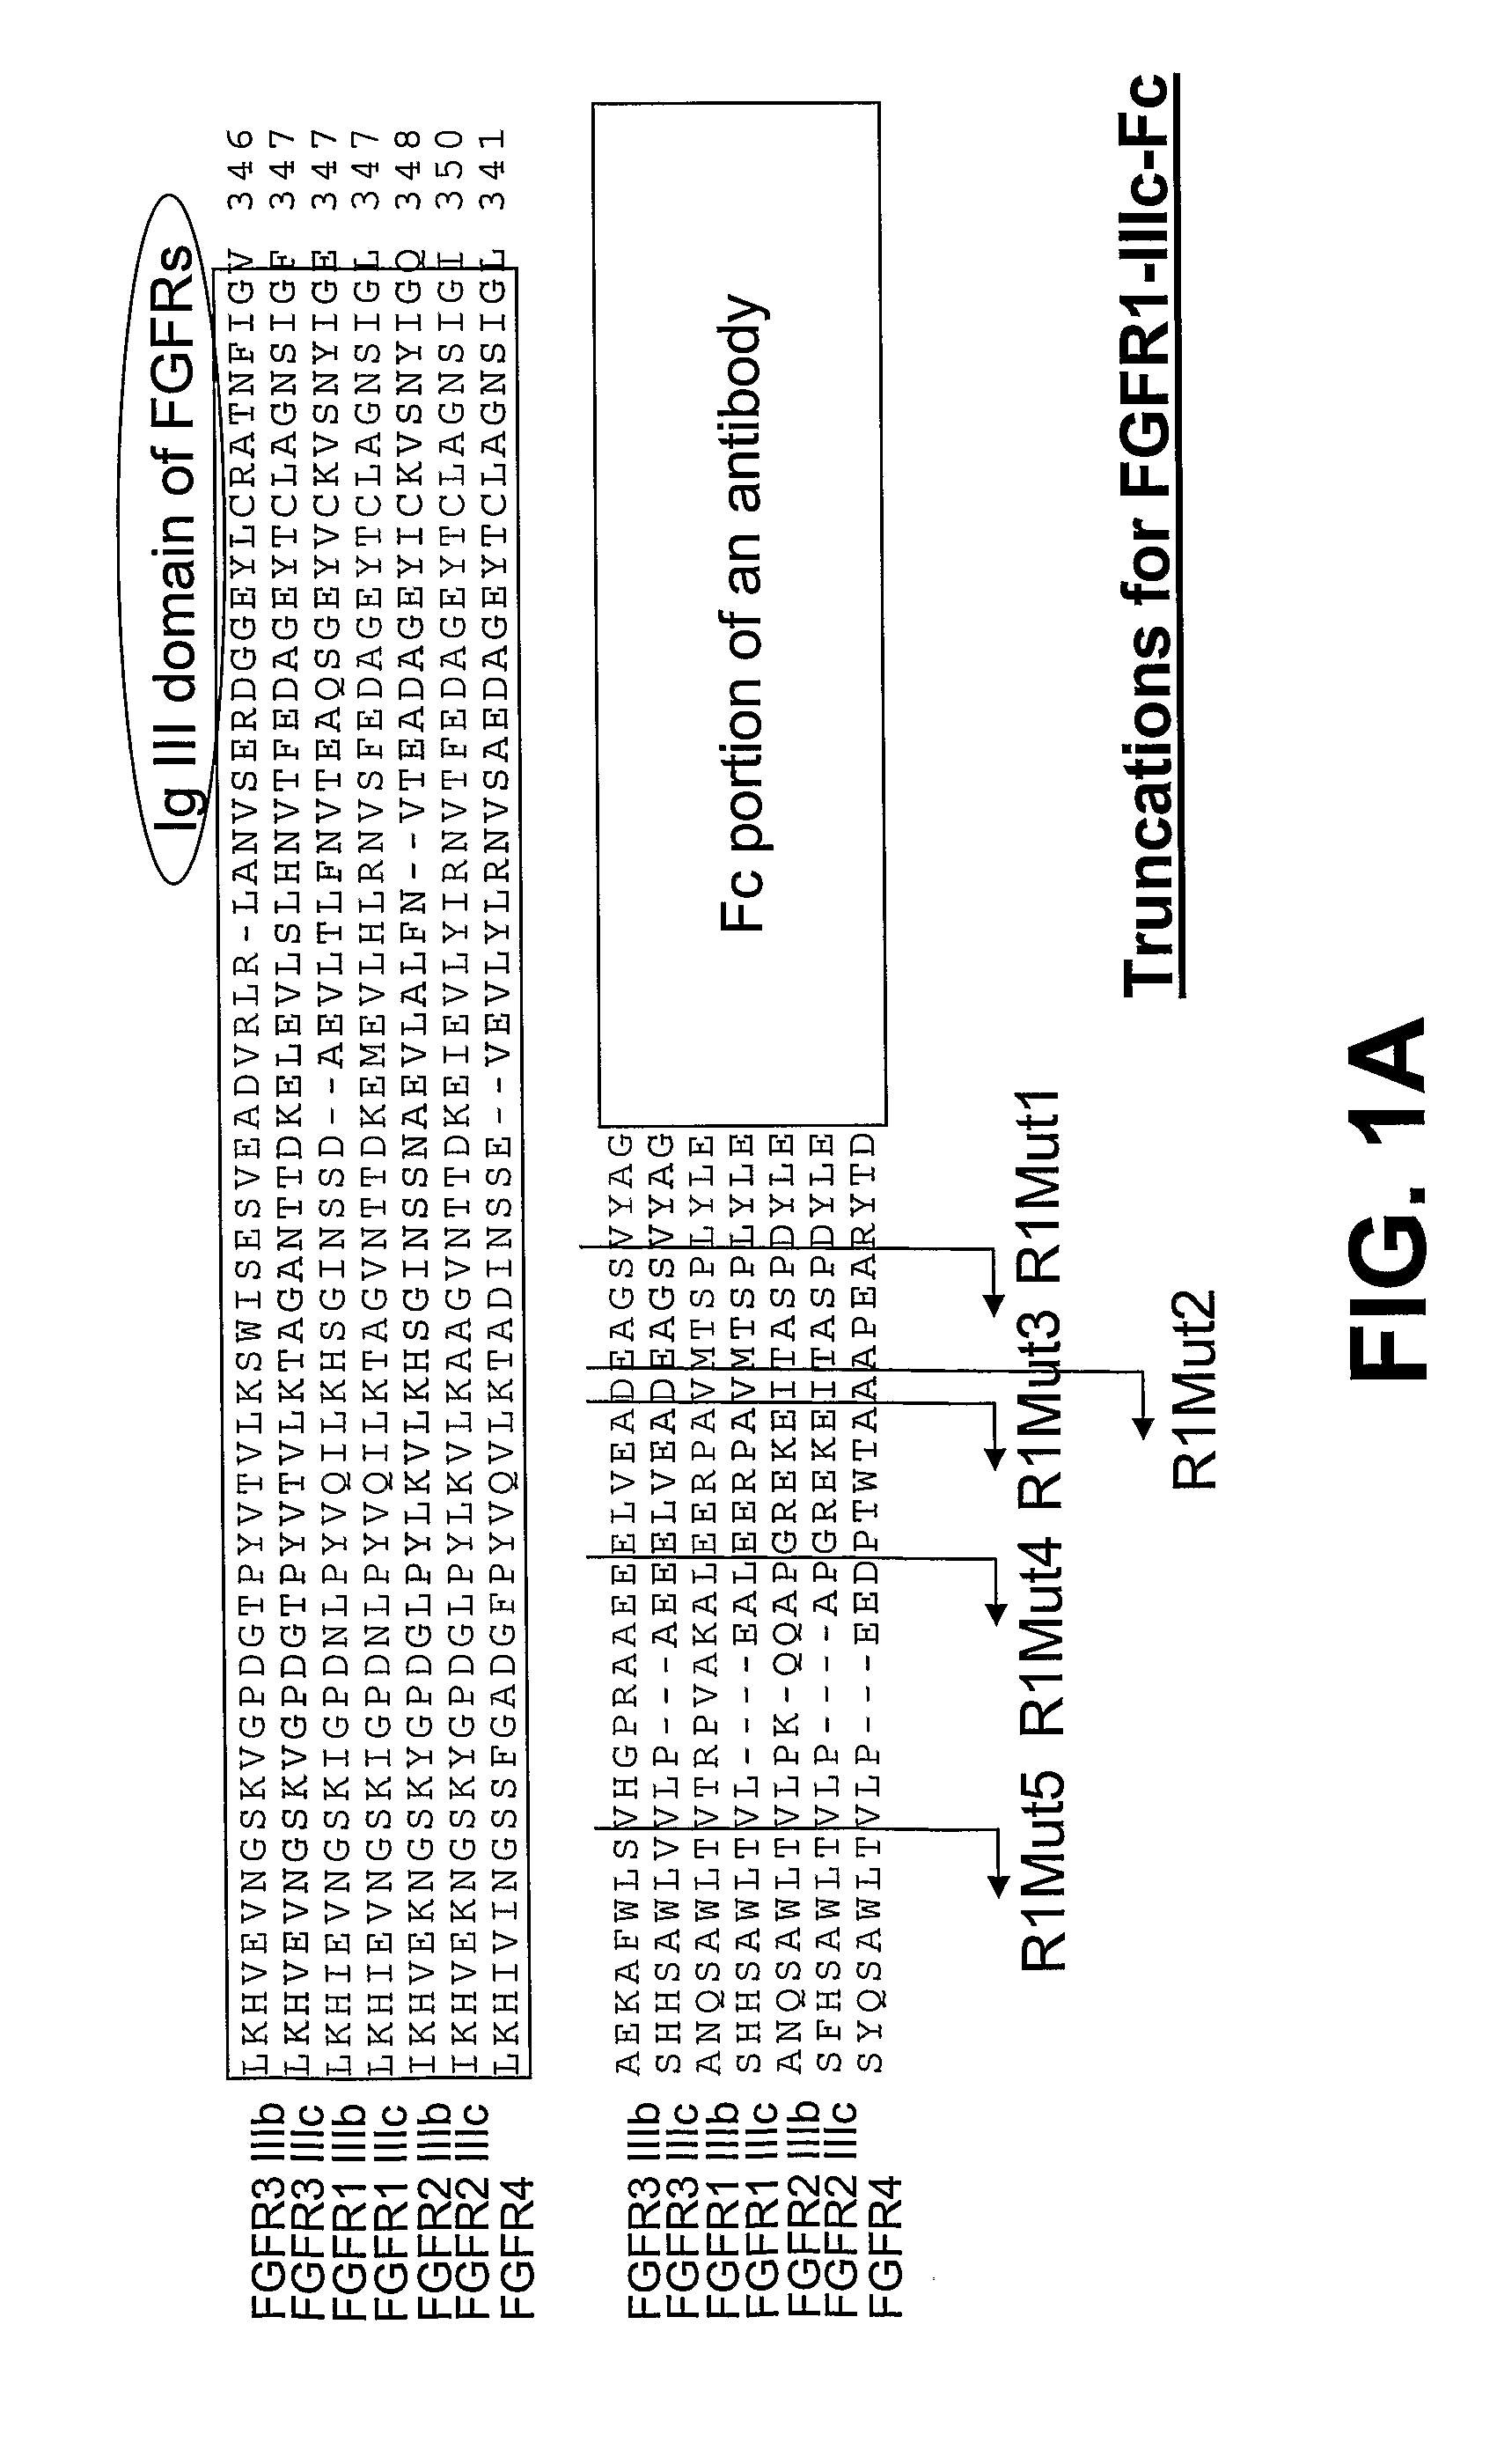 Compositions and Methods of Treating Disease with Fgfr Fusion Proteins